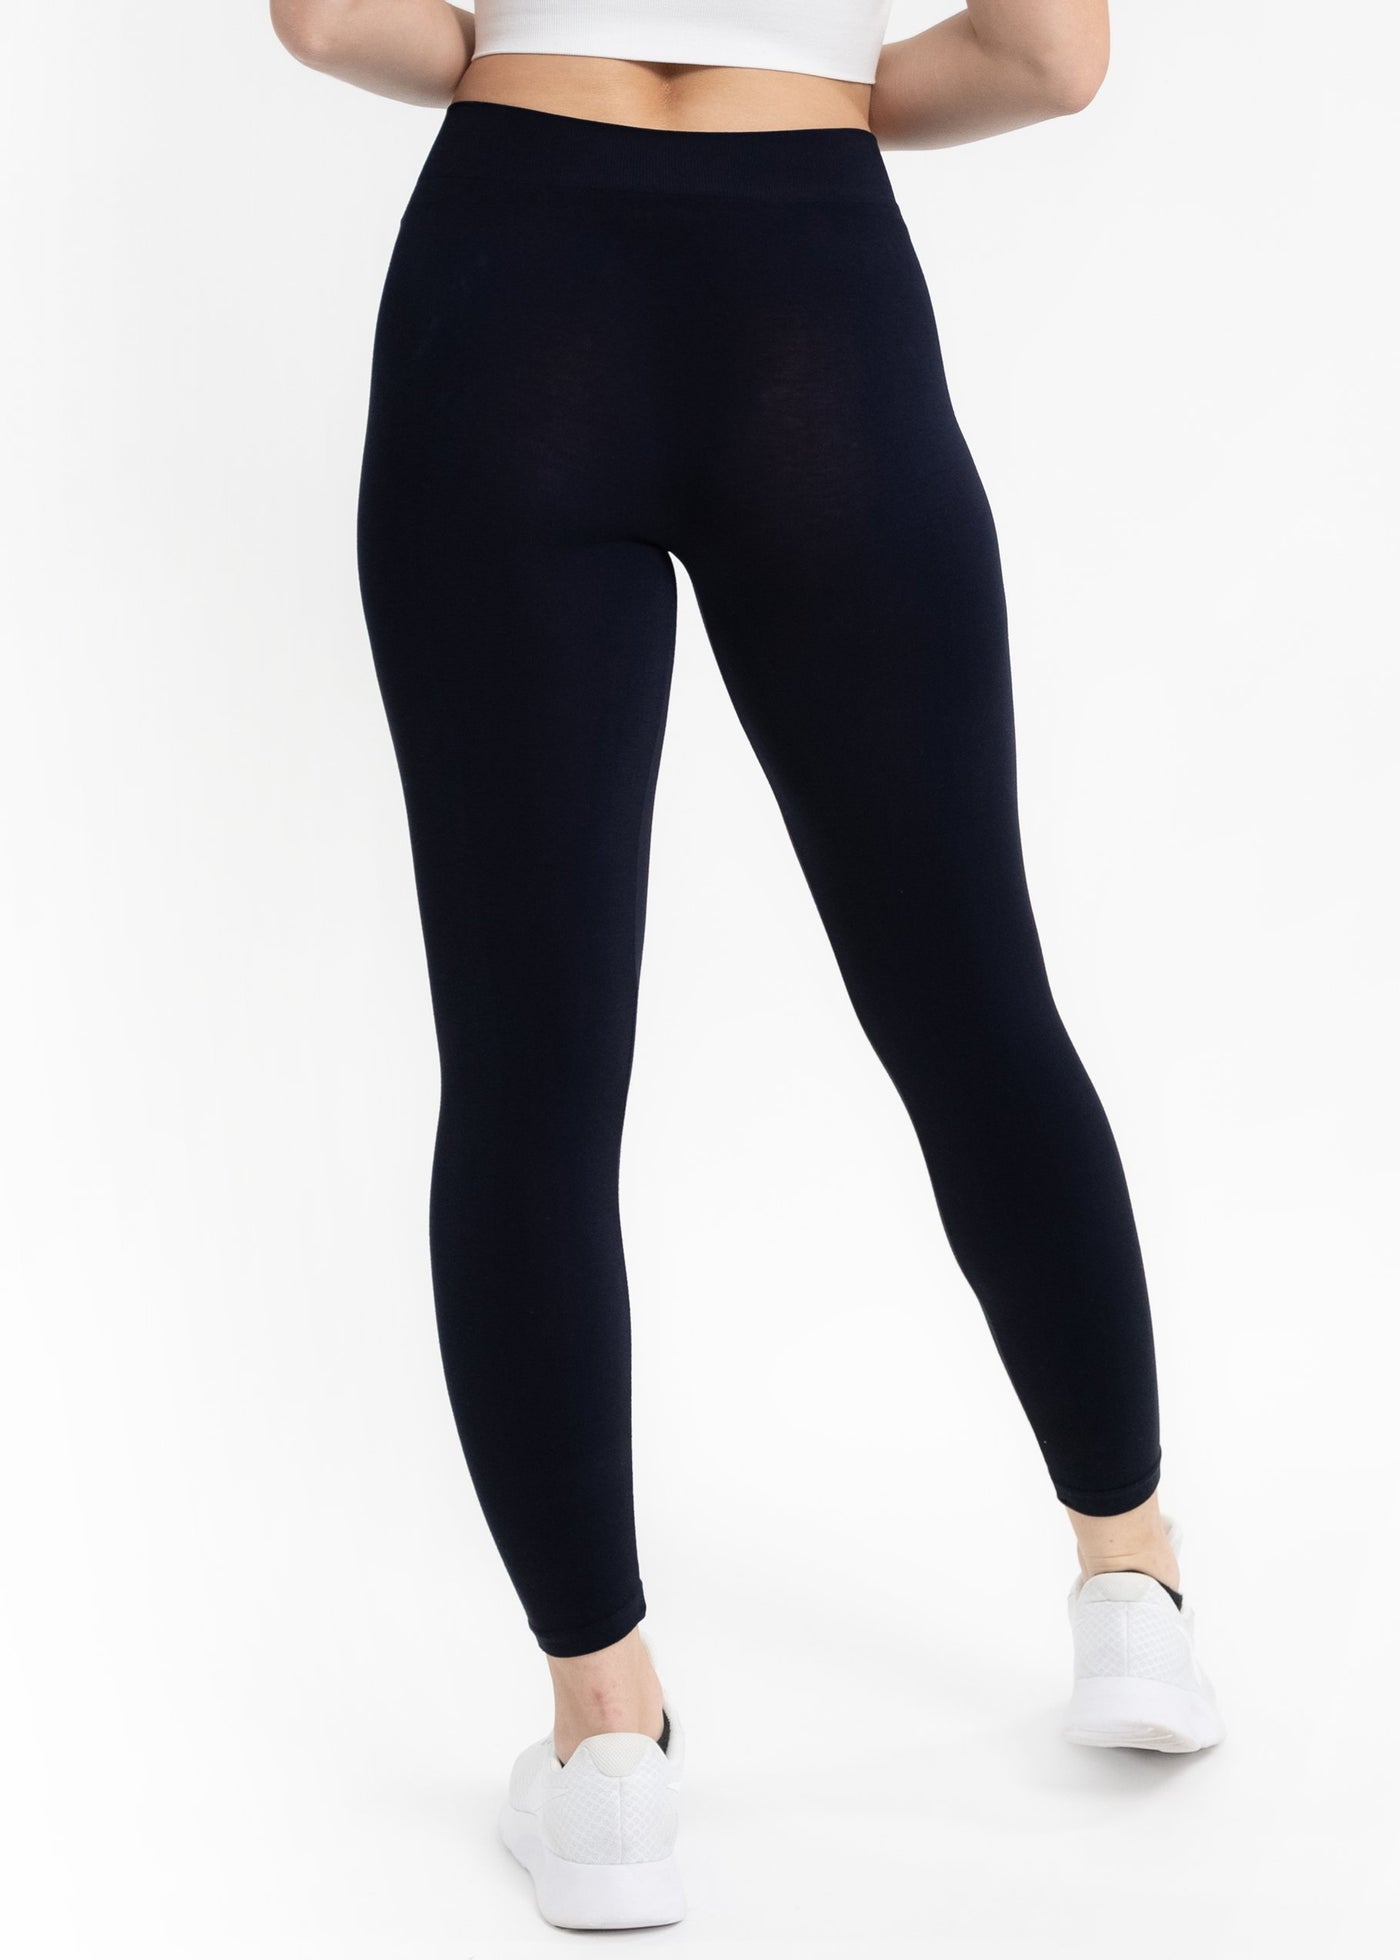 Elietian High Waisted Leggings - New Moon Boutique